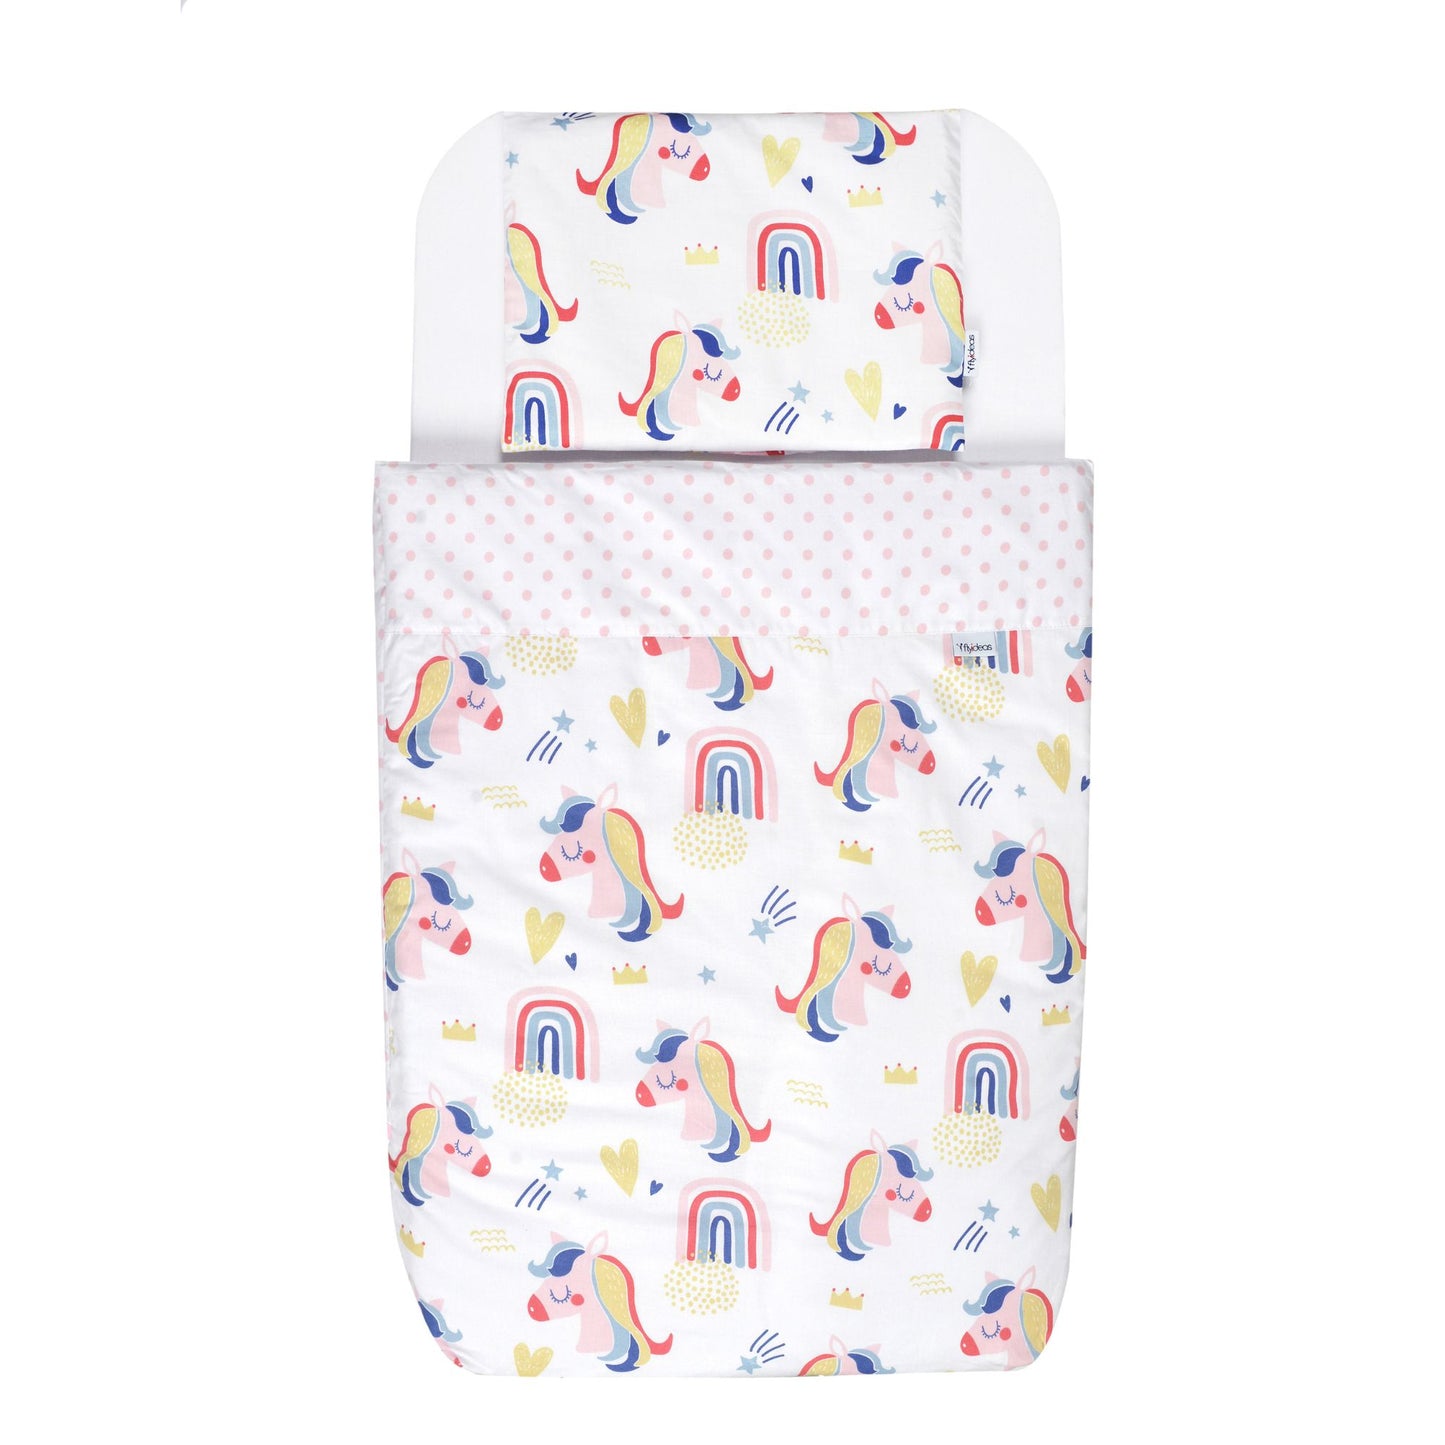 FlyIdeas Complete Bedside Crib Sheets Set with Duvet (Optional)